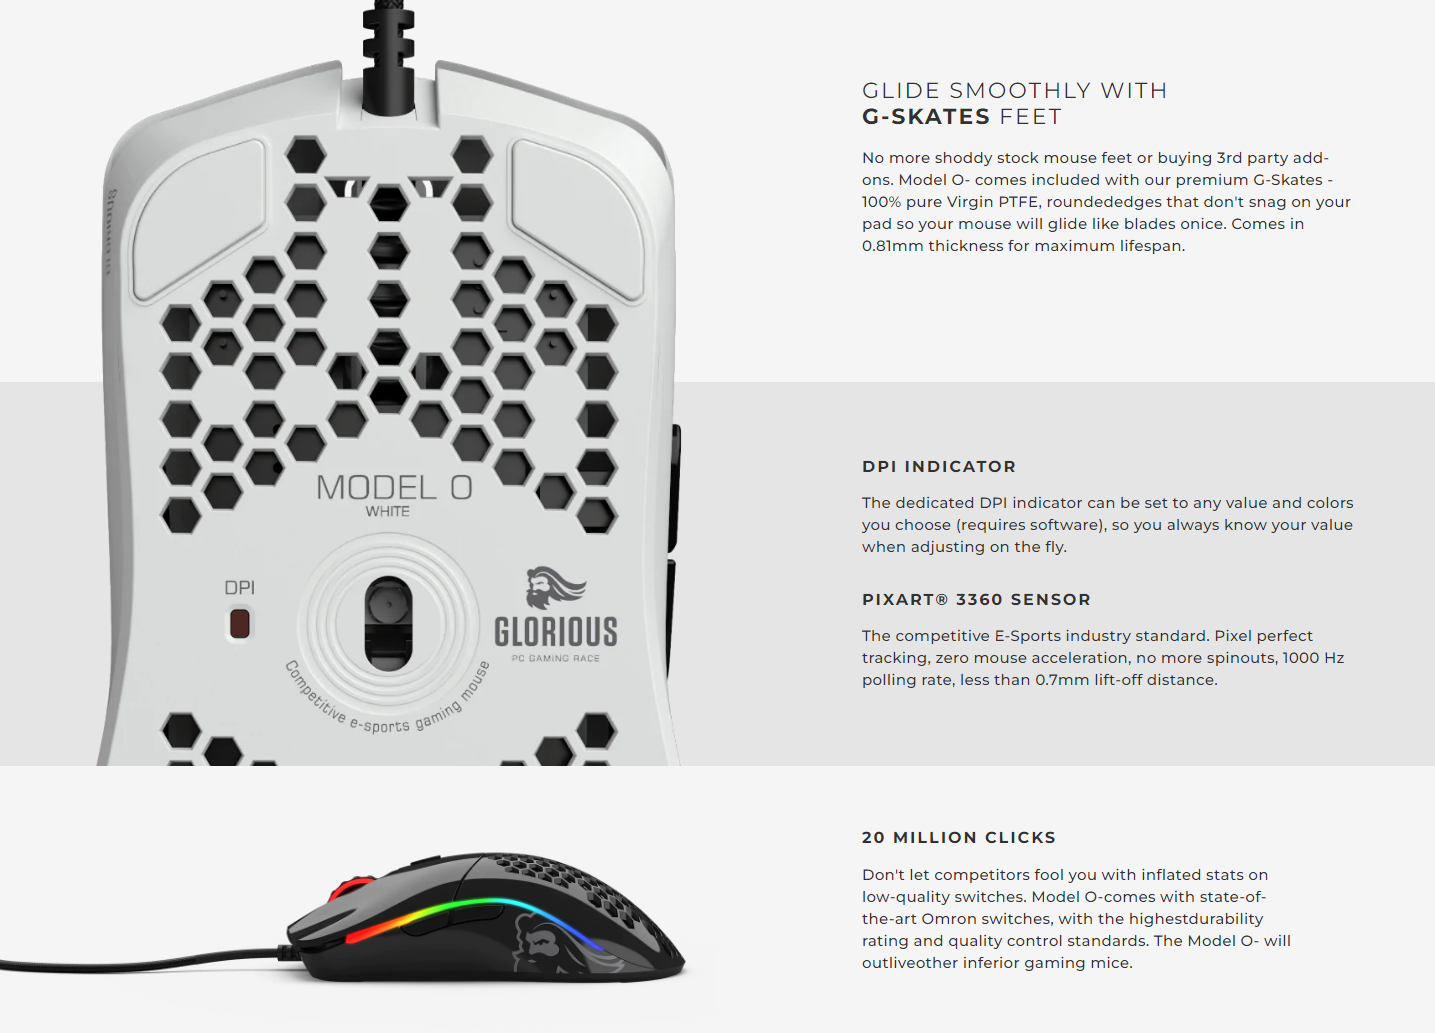 A large marketing image providing additional information about the product Glorious Model O Minus Wired Gaming Mouse - Glossy White - Additional alt info not provided